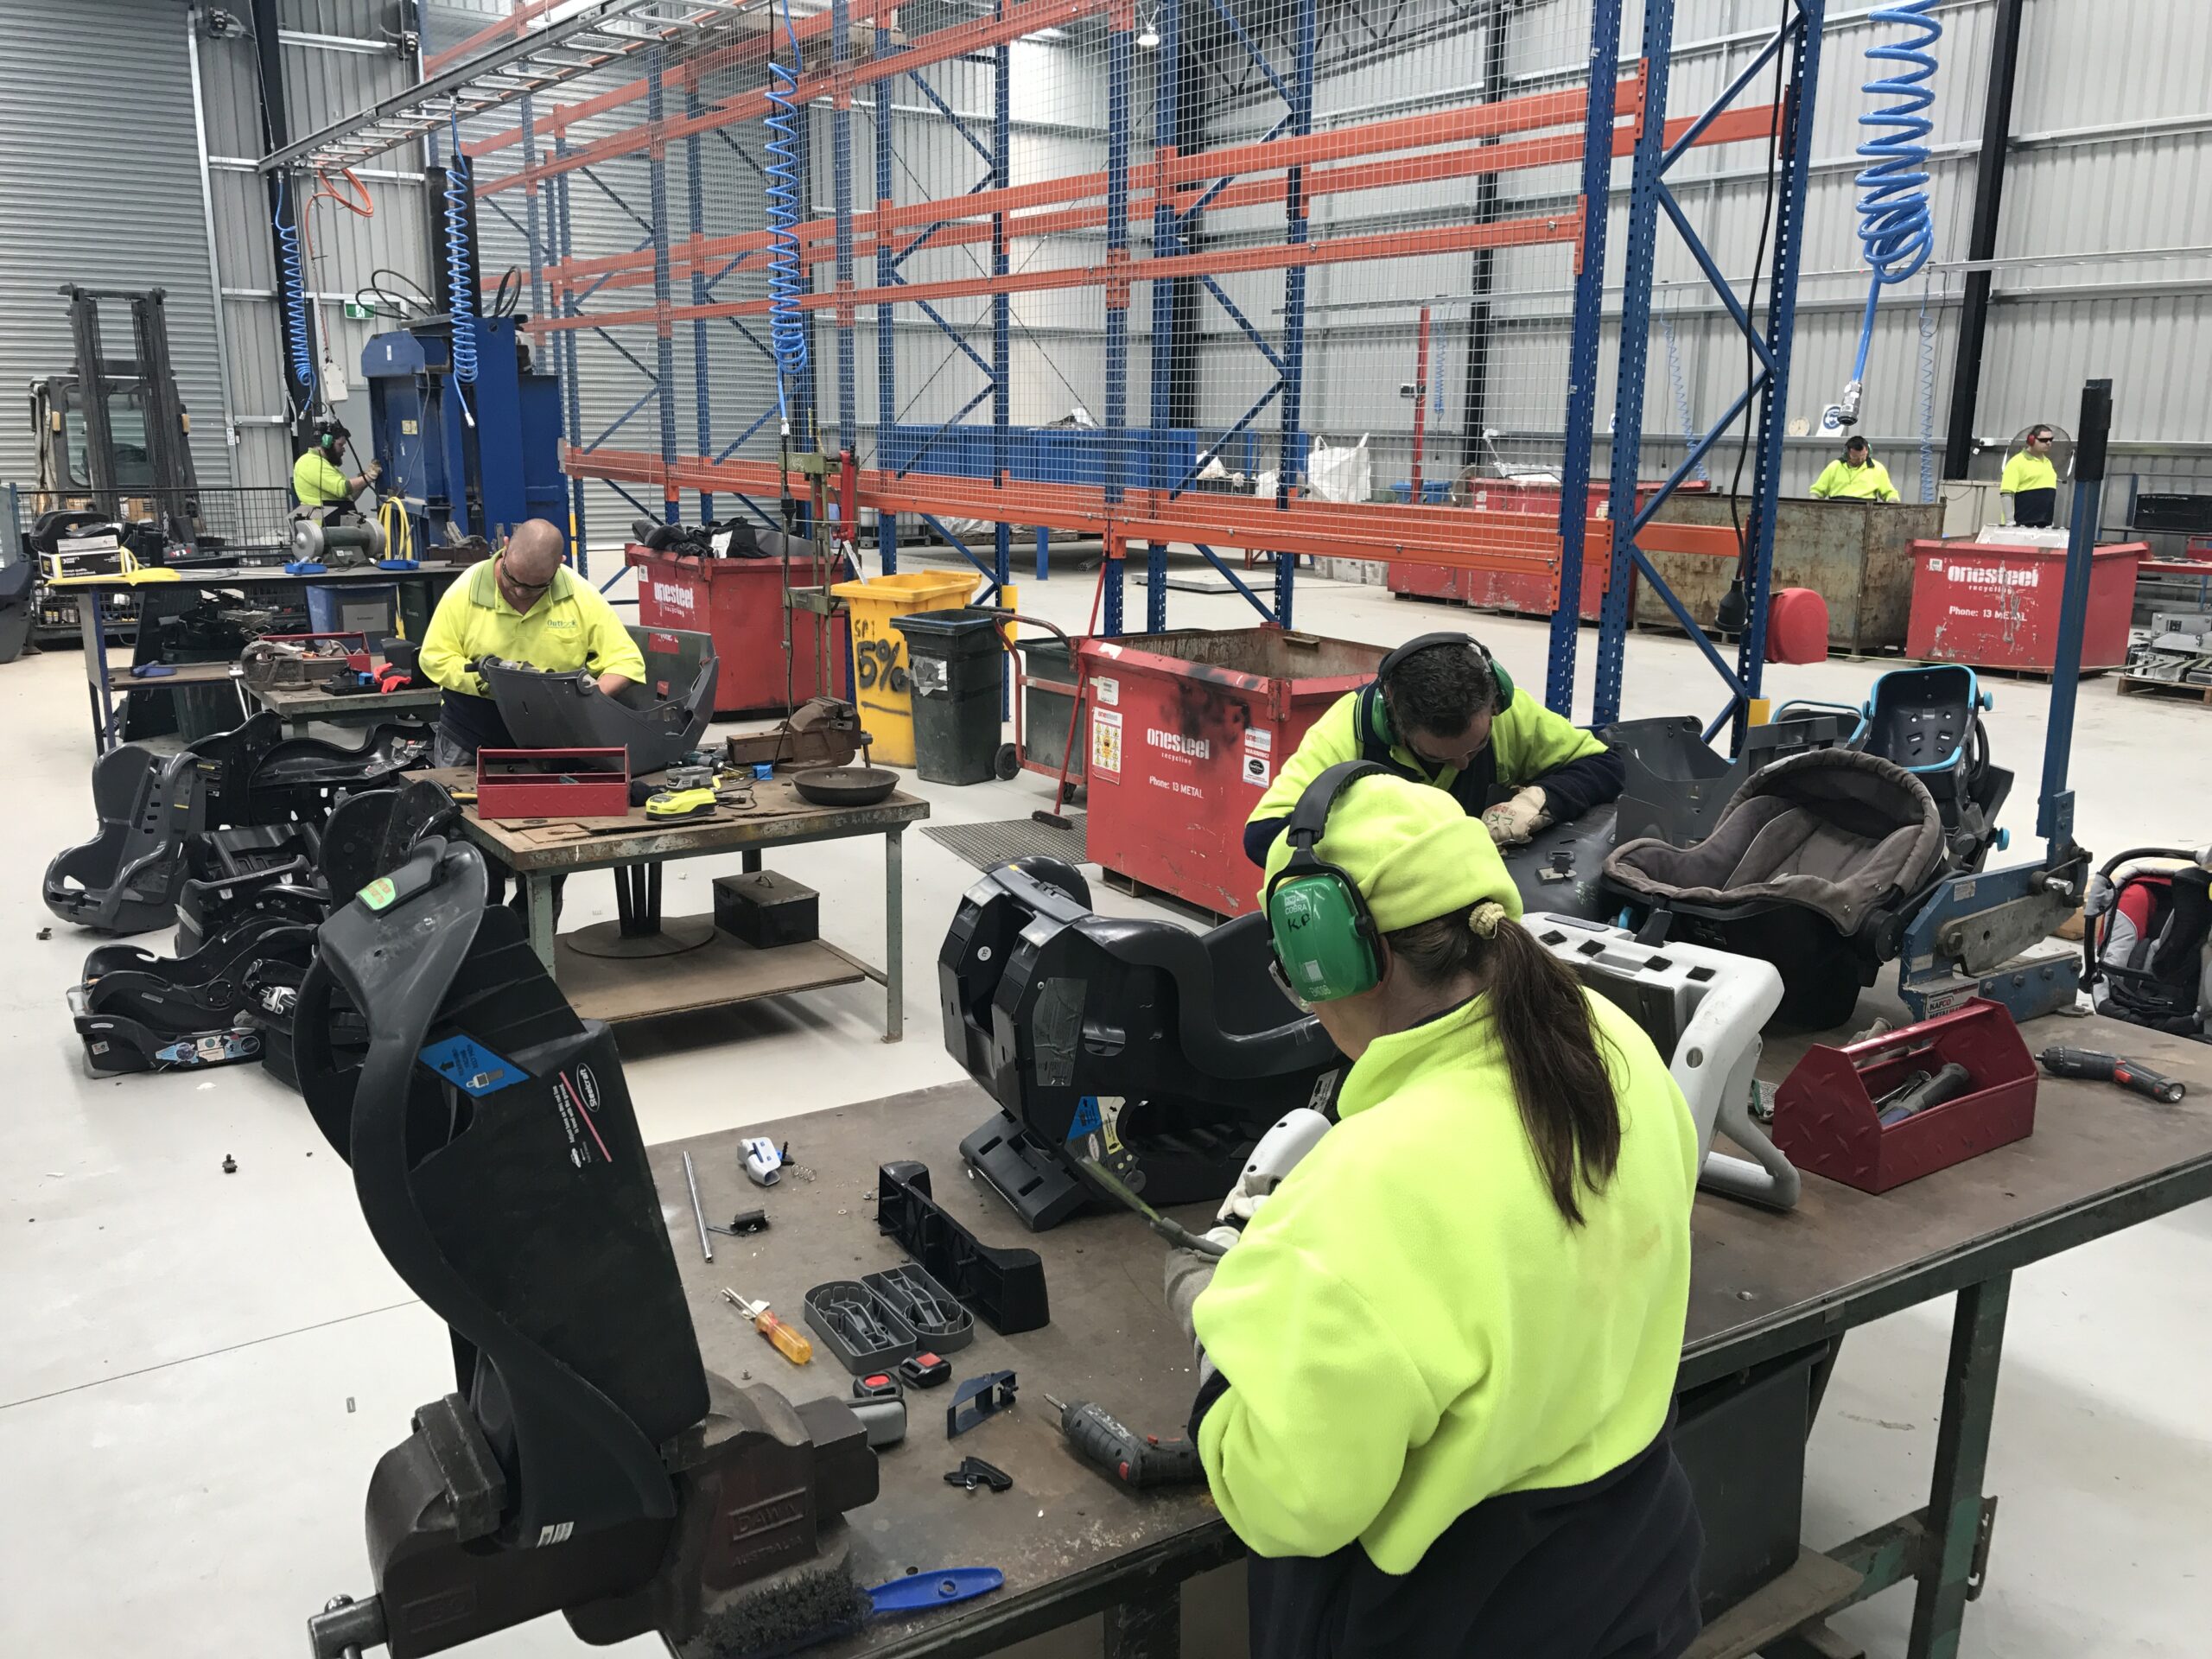 work team dismantling child safety seats for recycling